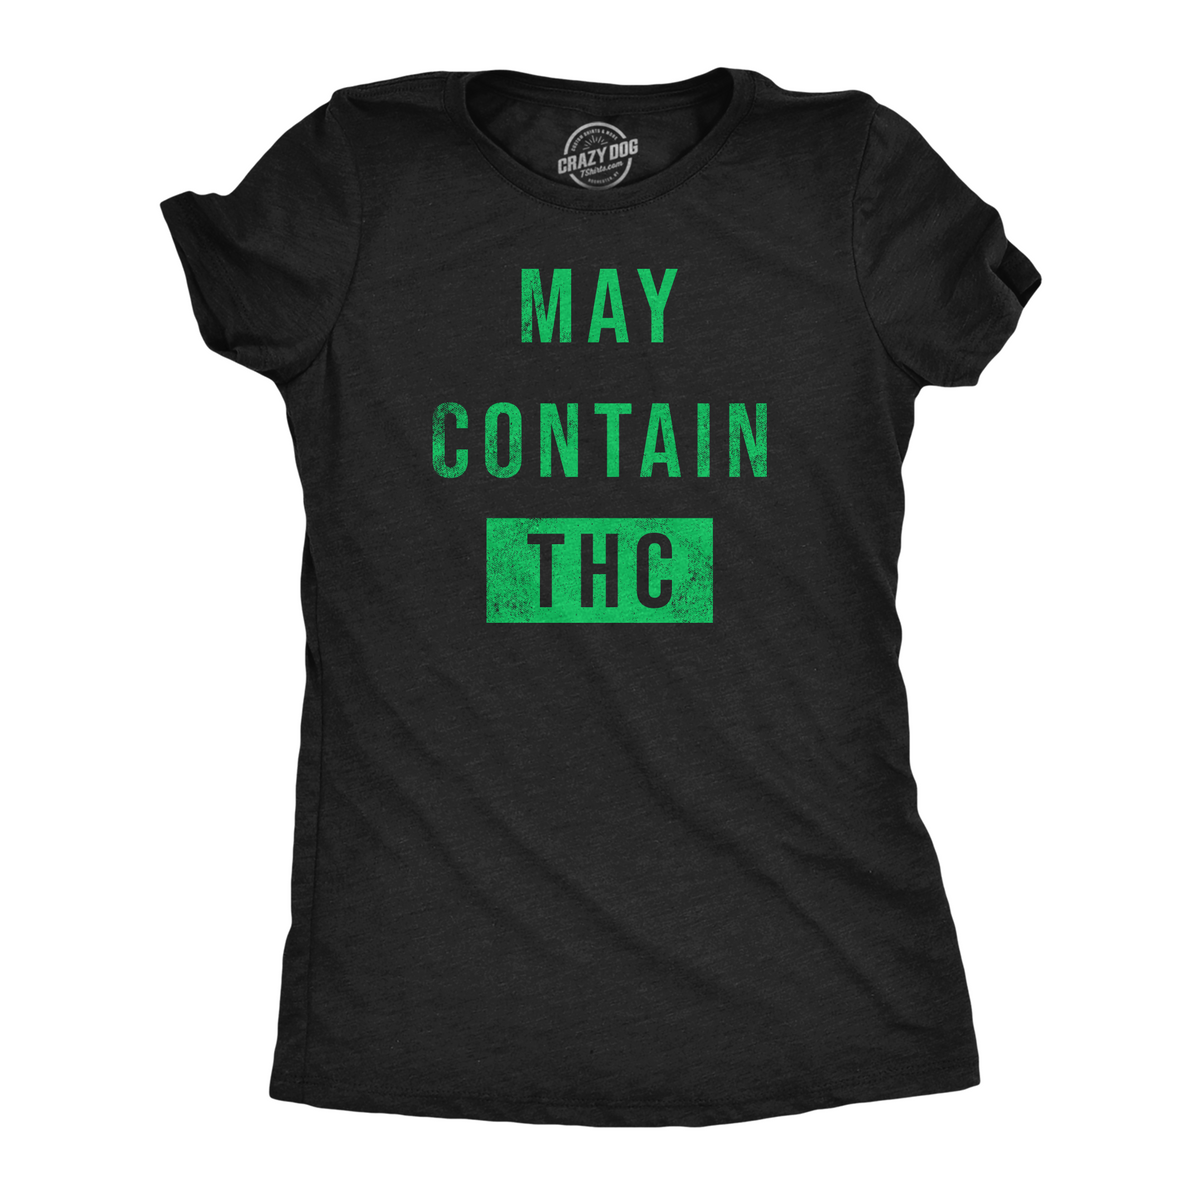 Funny Heather Black - May Contain THC May Contain THC Womens T Shirt Nerdy 420 sarcastic Tee